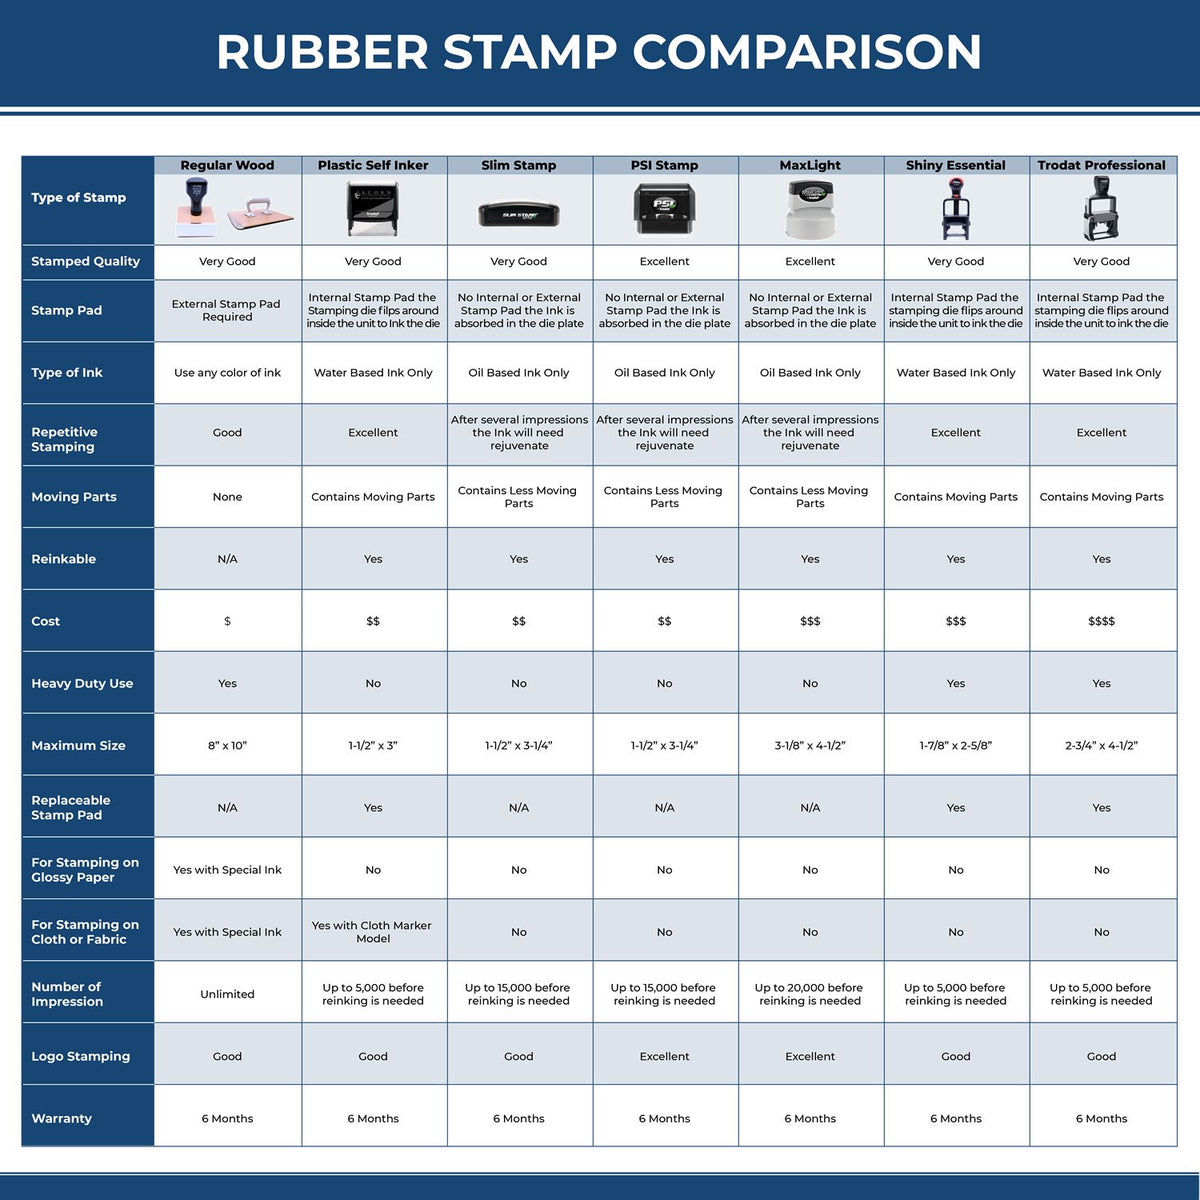 A comparison chart for the different types of mount models available for the South Carolina Professional Engineer Seal Stamp.